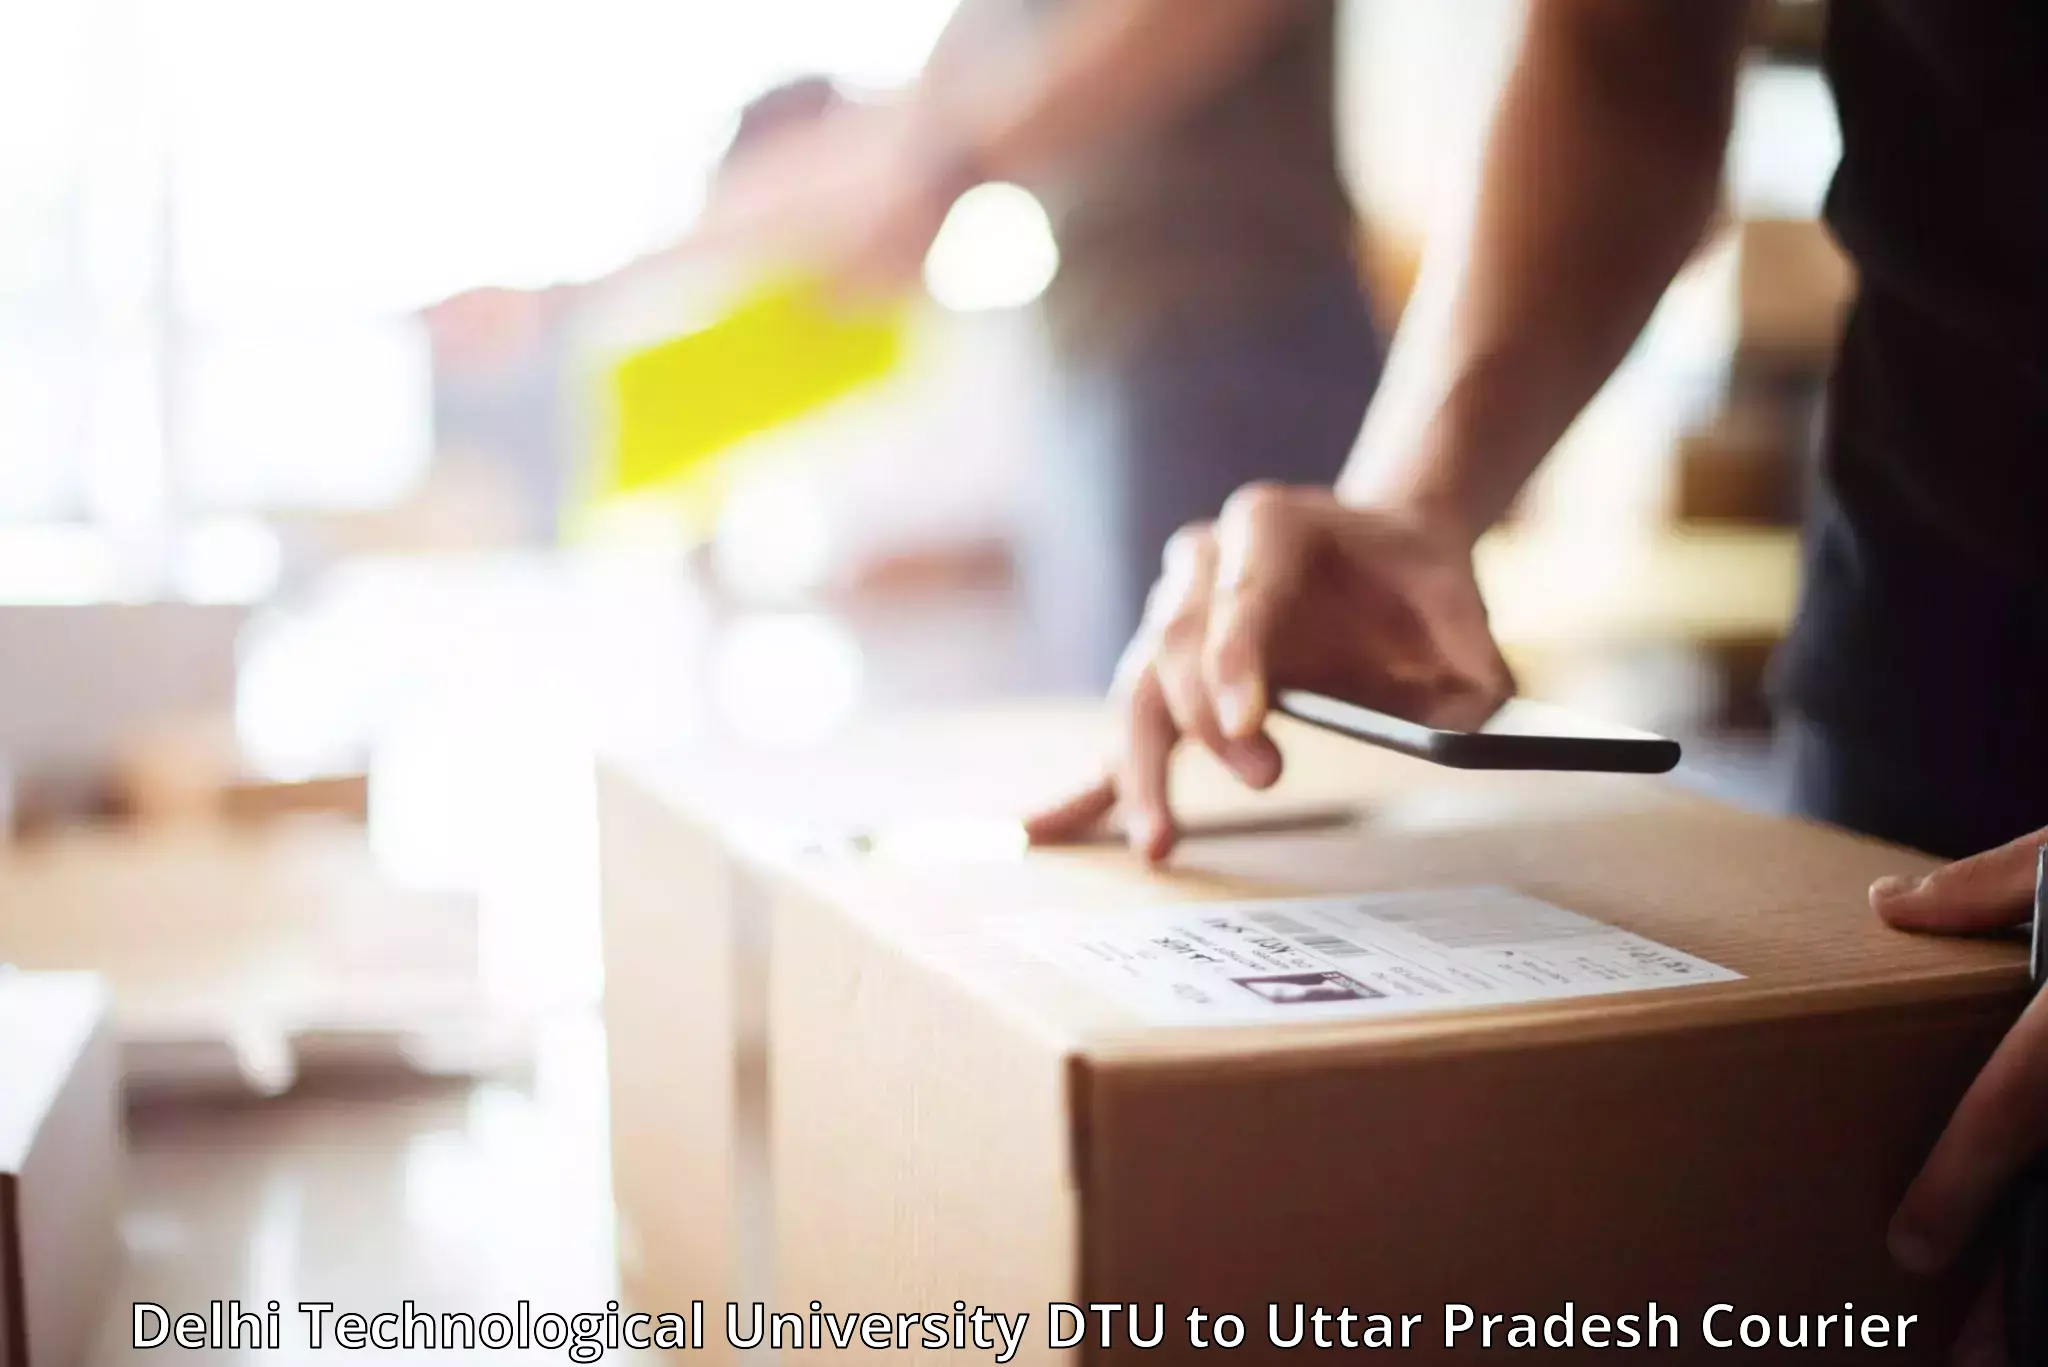 Hassle-free luggage shipping Delhi Technological University DTU to Agra